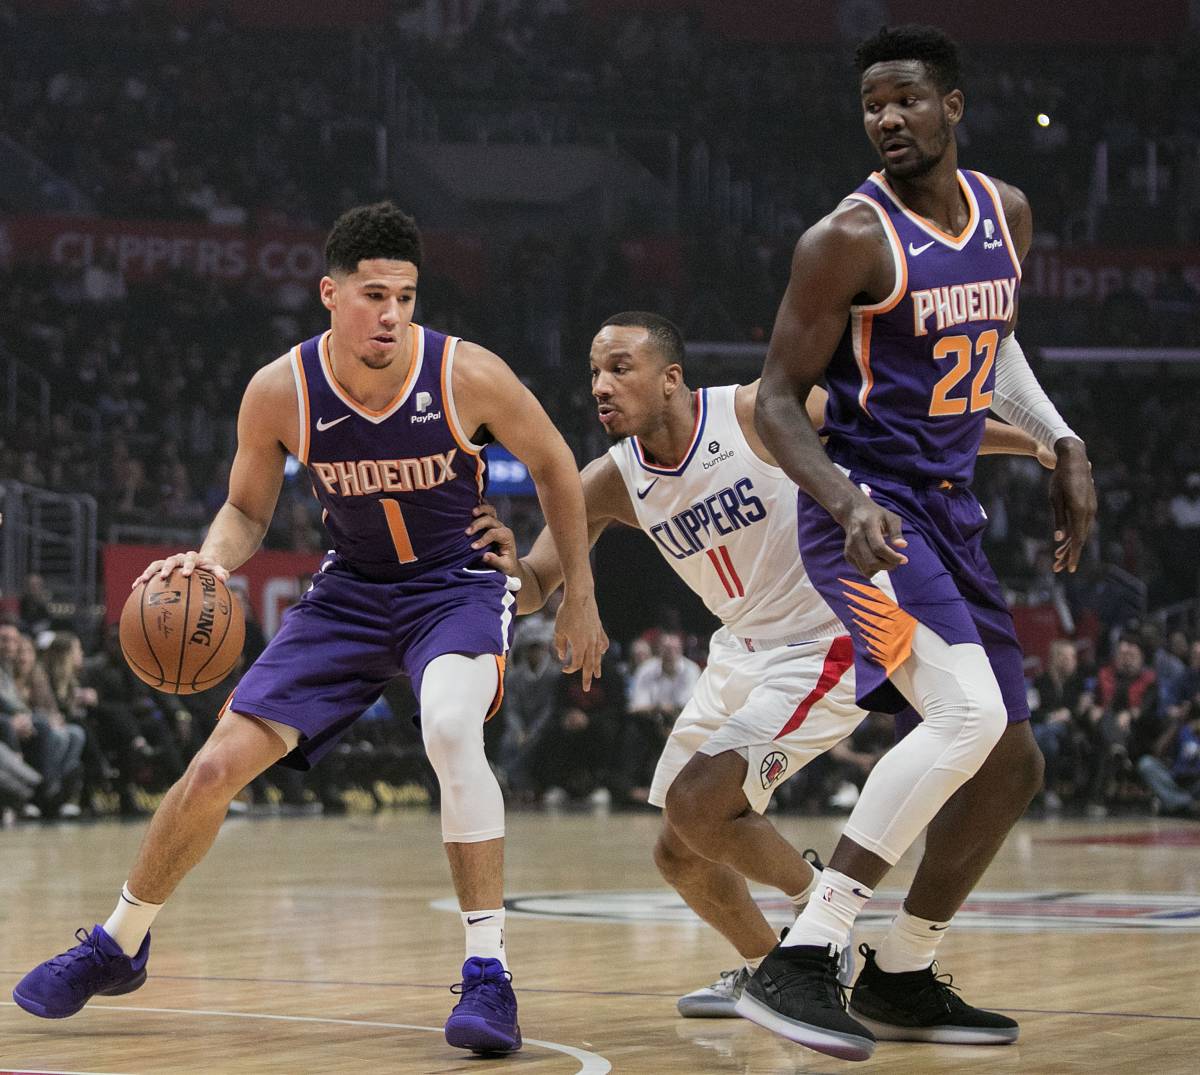 Los Angeles Clippers - Phoenix Suns: forecast and bet on the NBA playoffs match